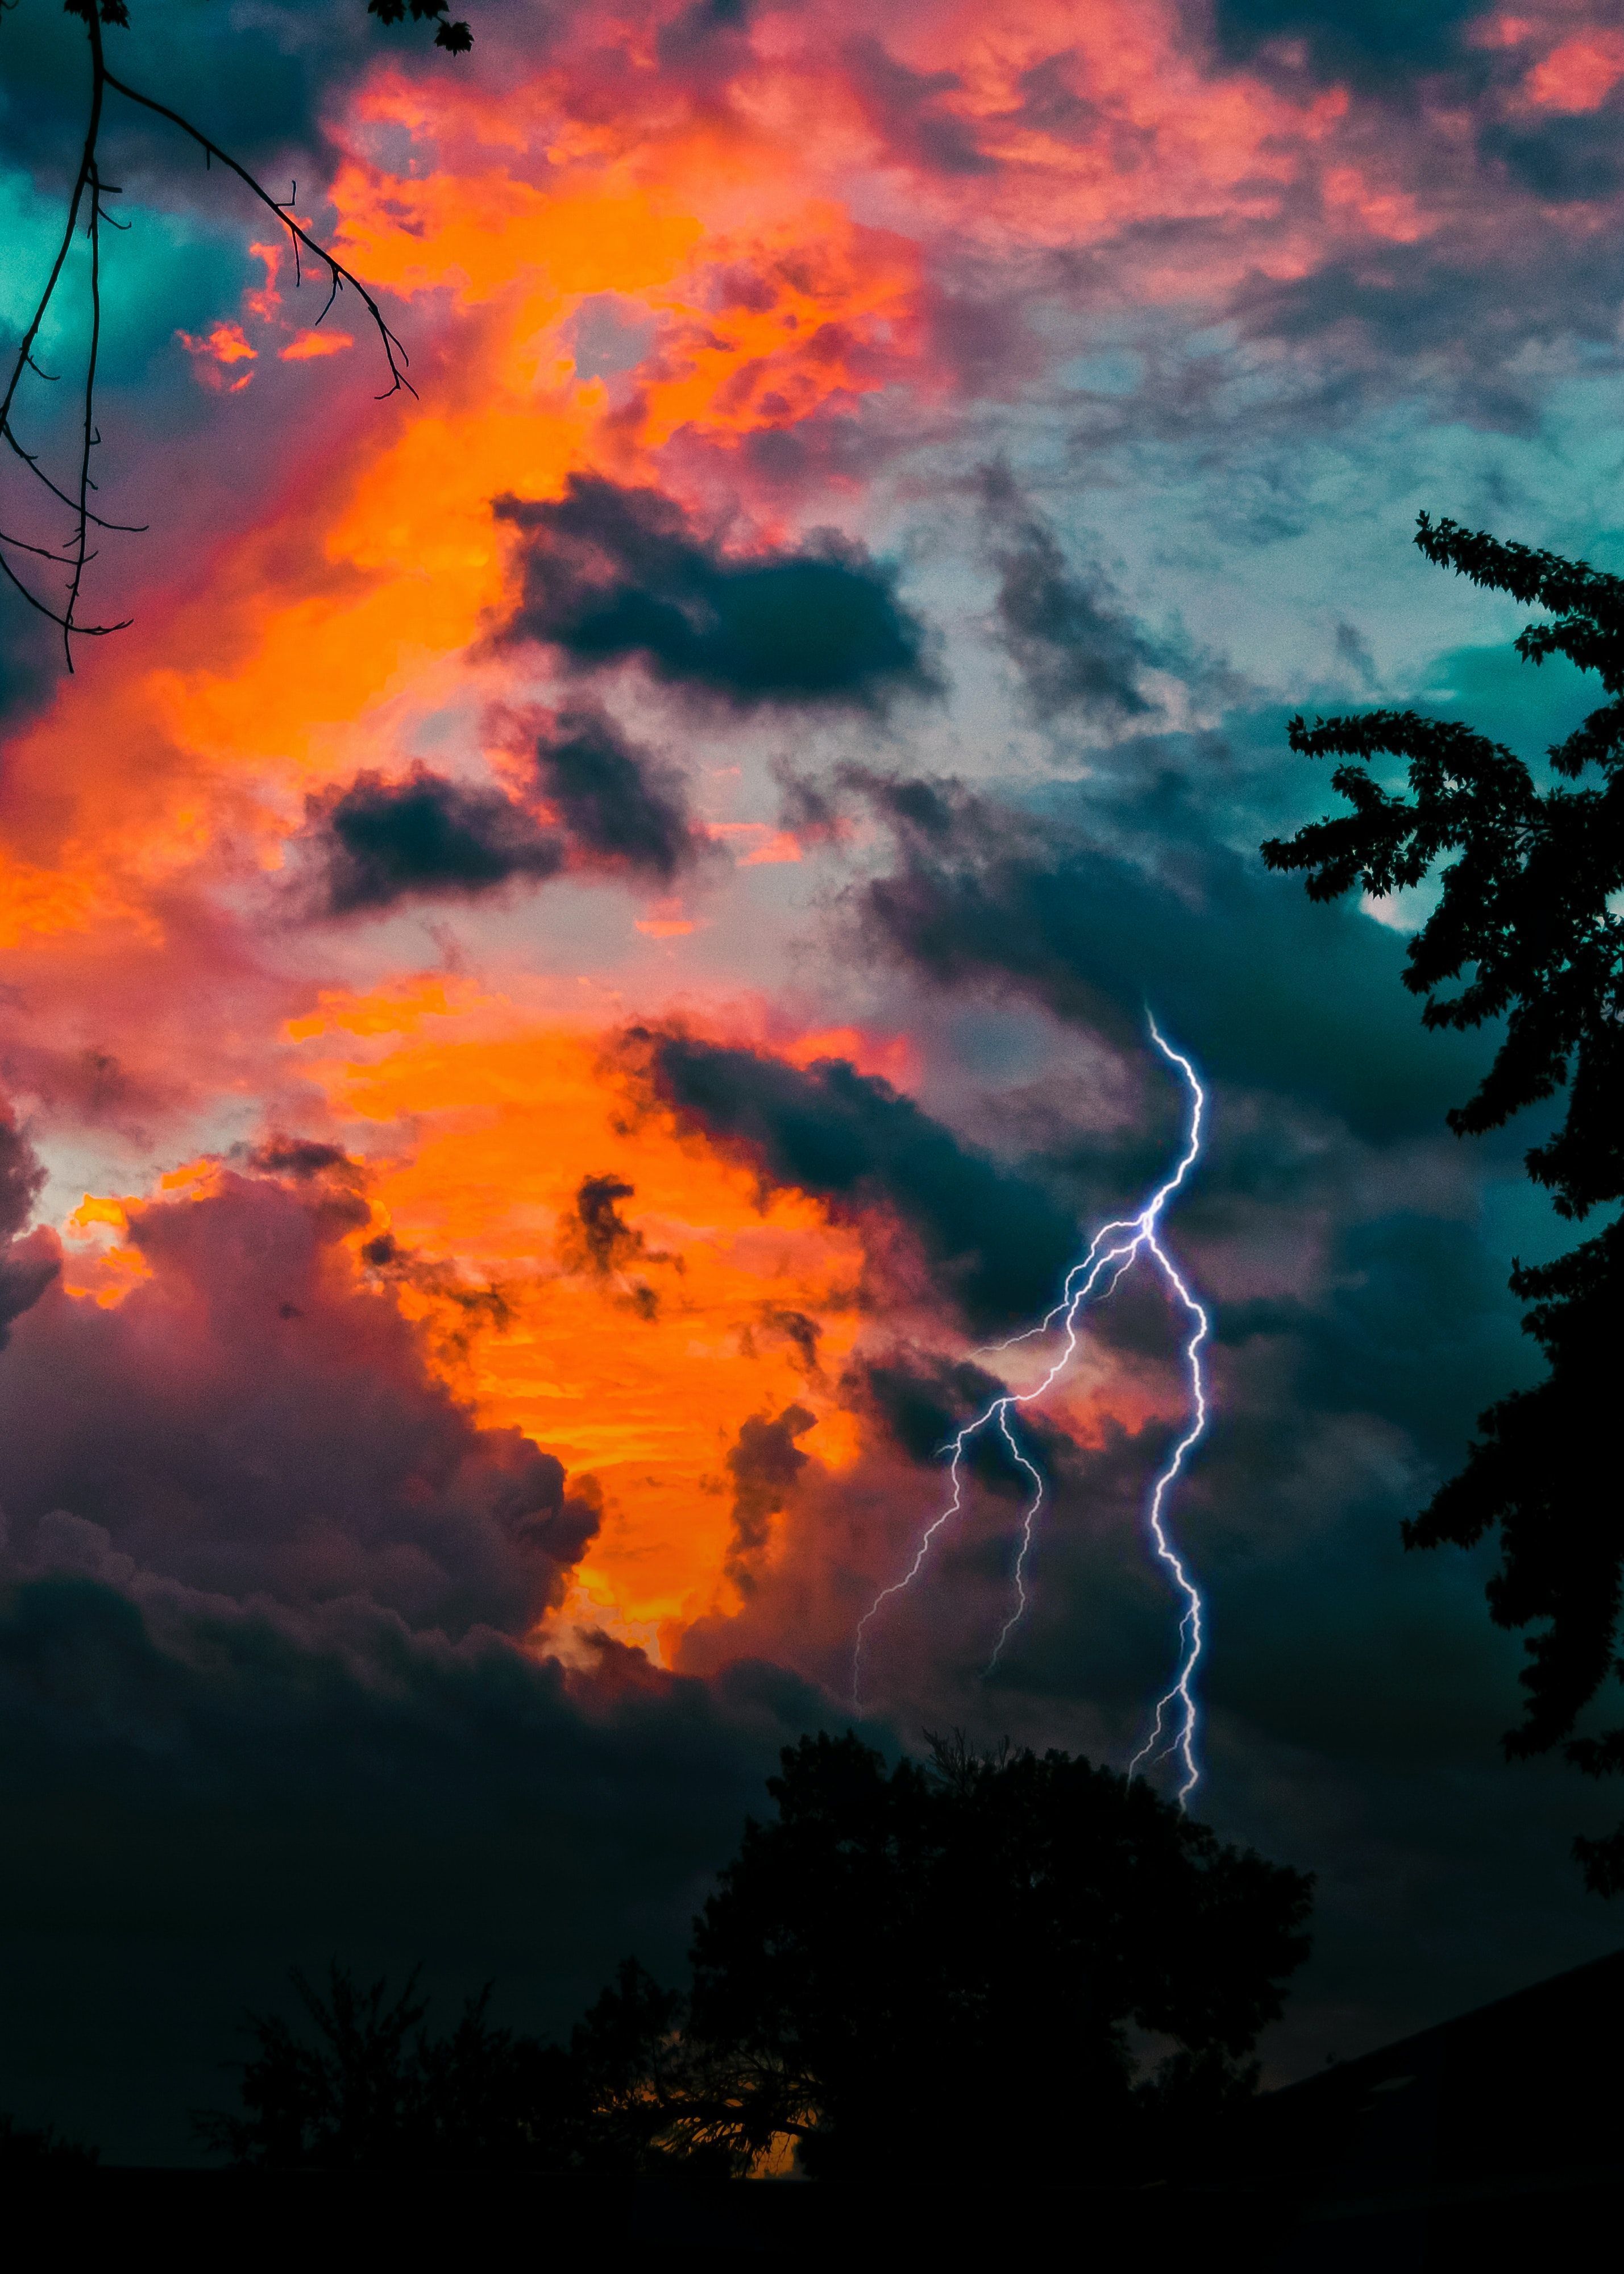 A lightning bolt strikes the sky in front of clouds - Lightning, storm